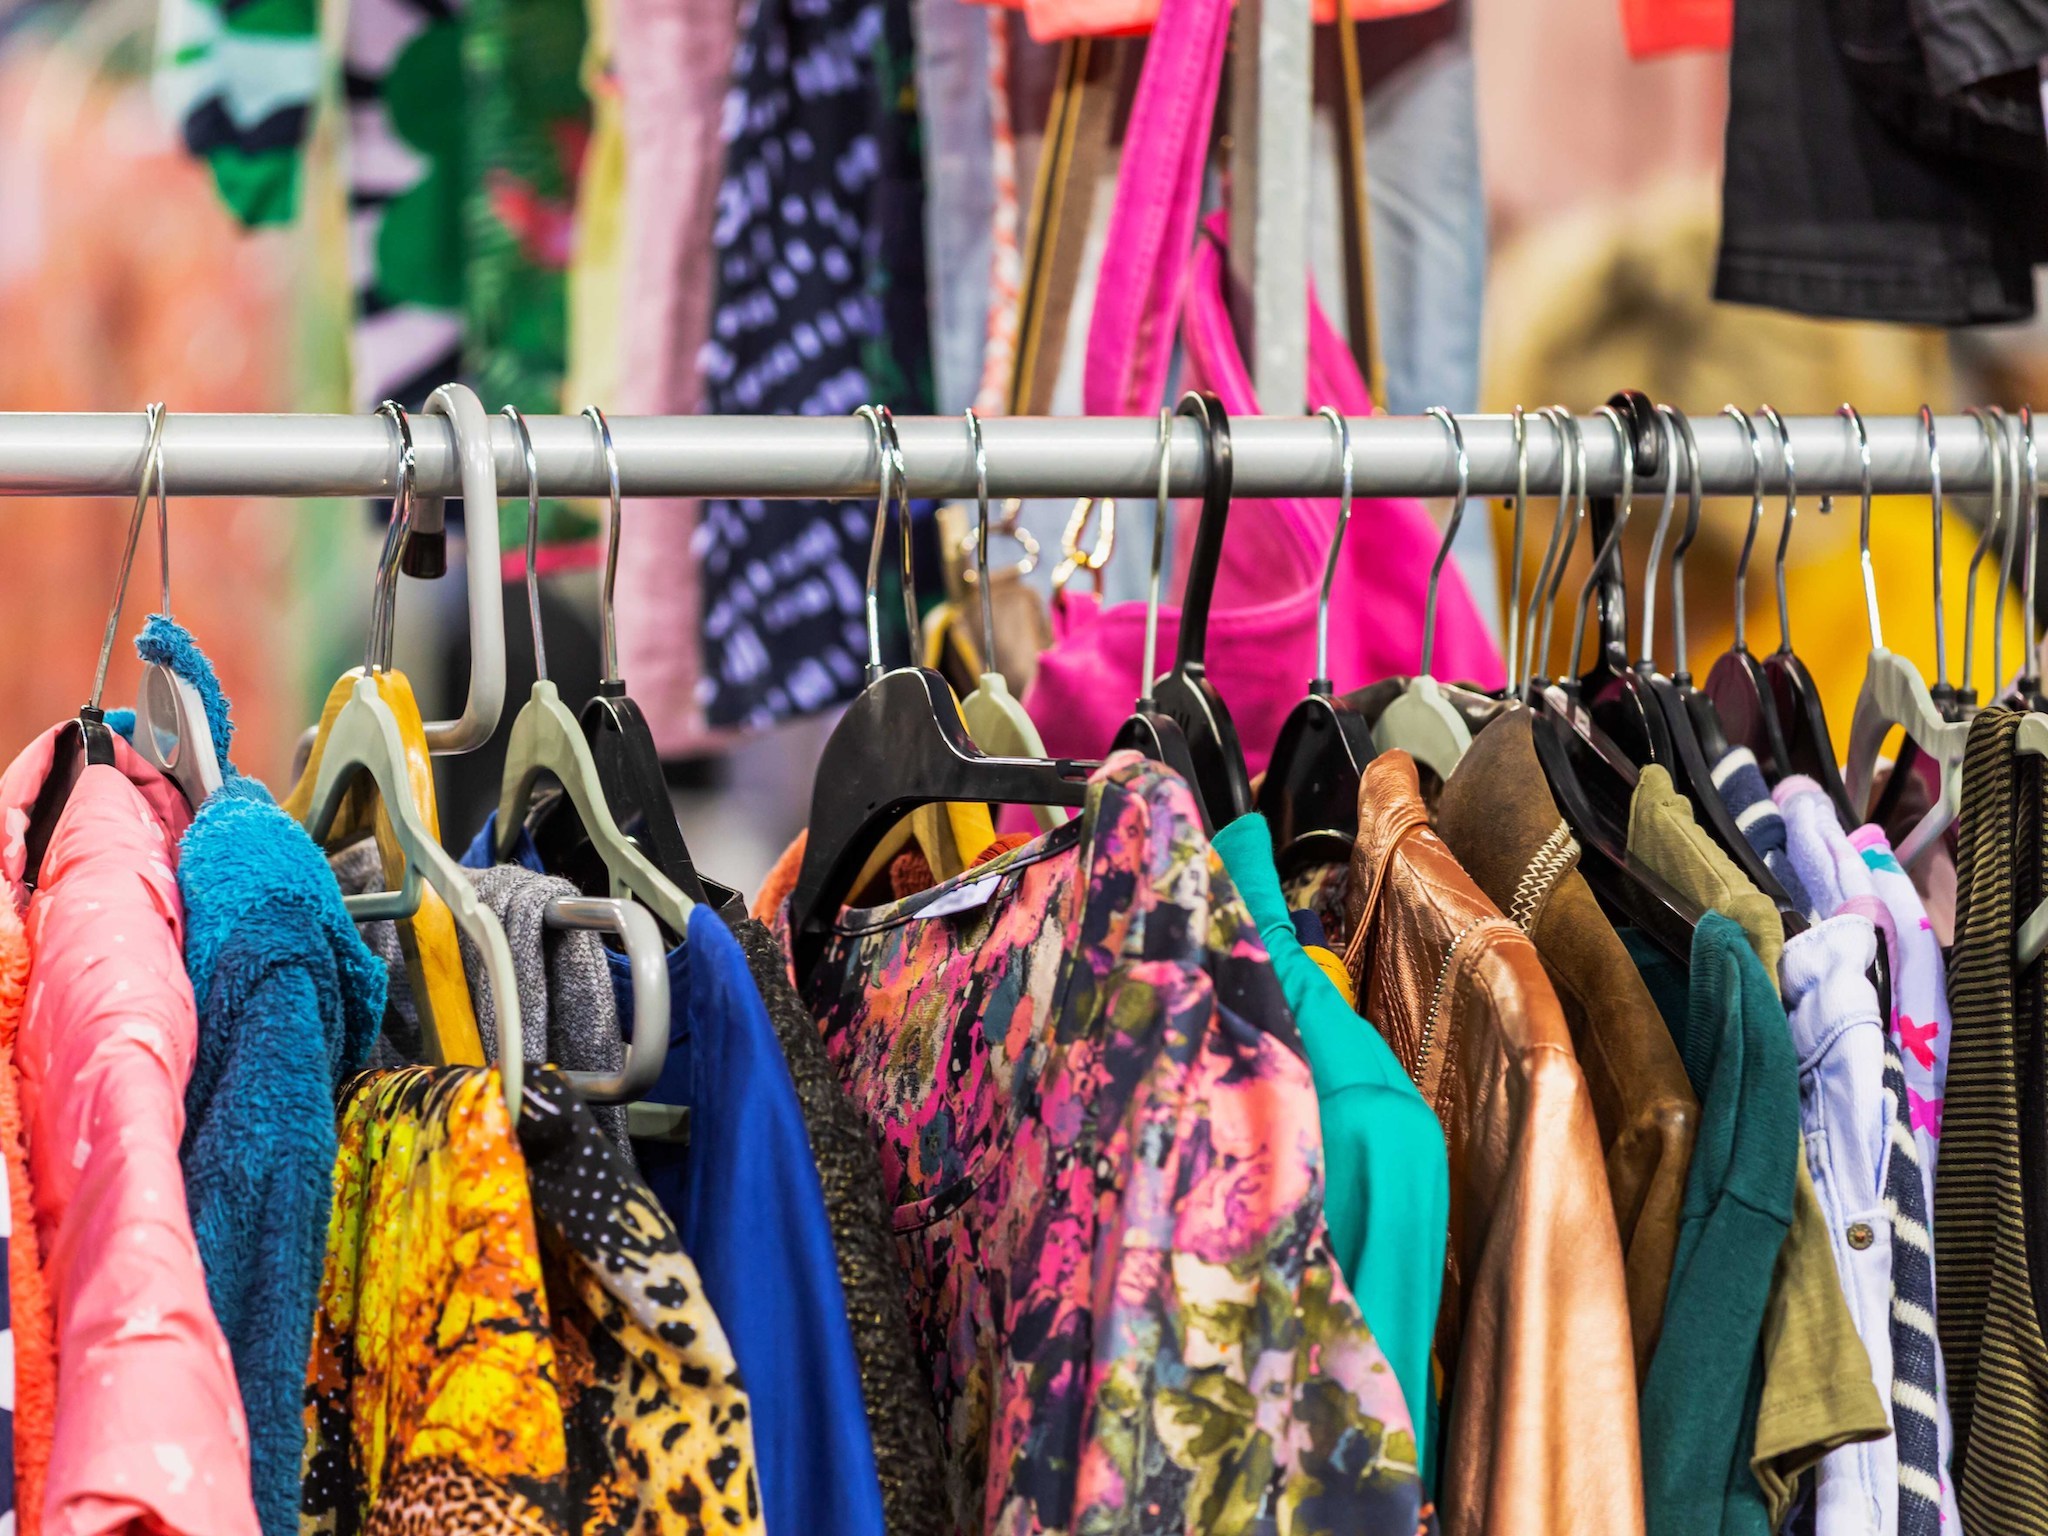 Top NYC vintage stores are hosting a clothing auction for undocumented ...